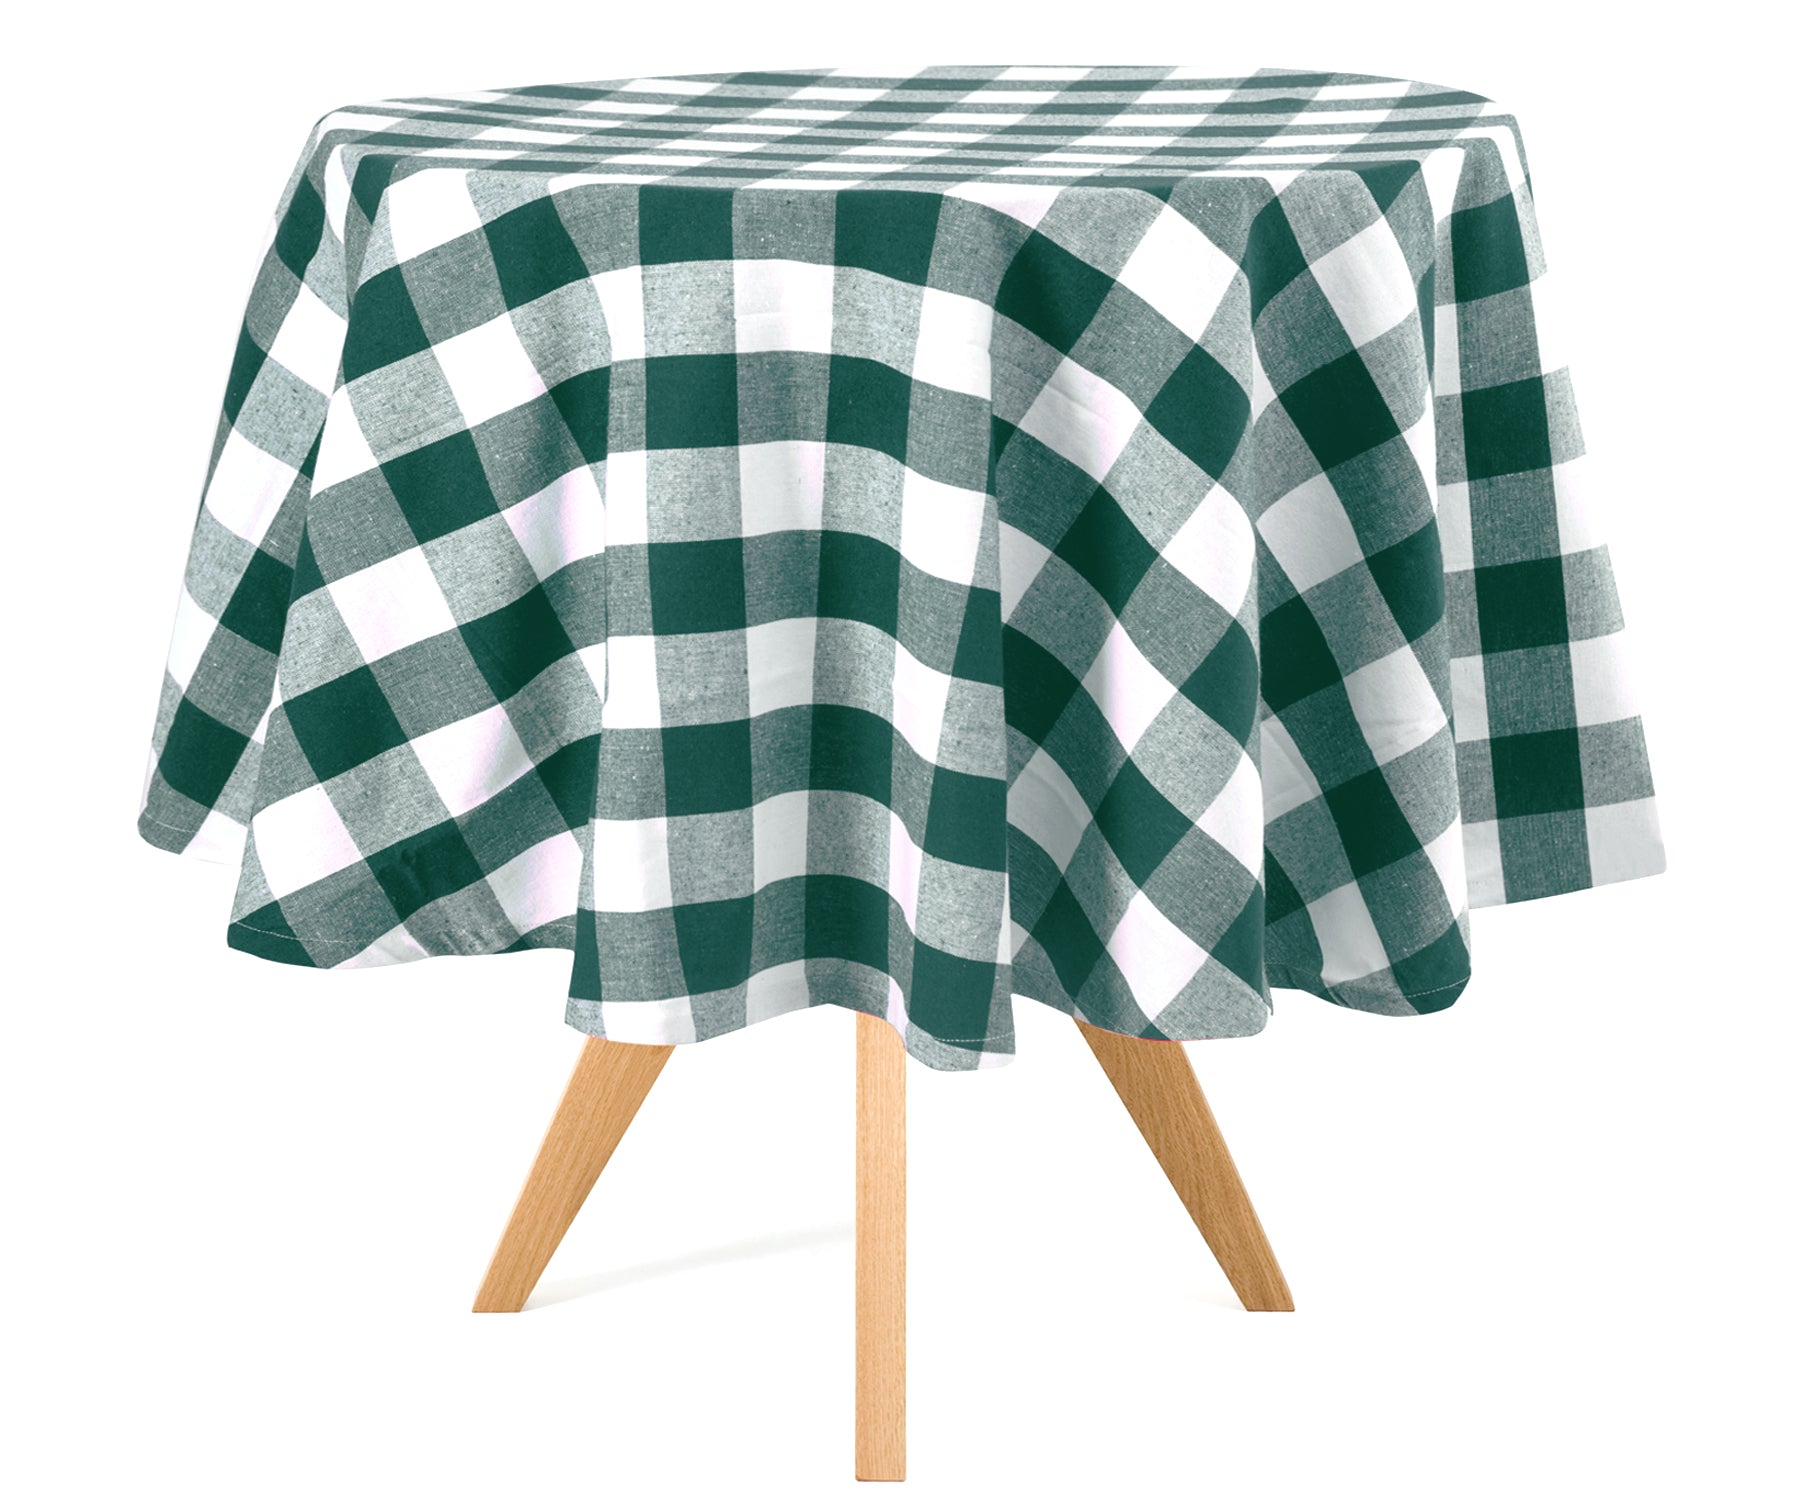 Round tablecloths, Thanksgiving-themed tablecloths, and green tablecloth options are available for your festive dining needs.